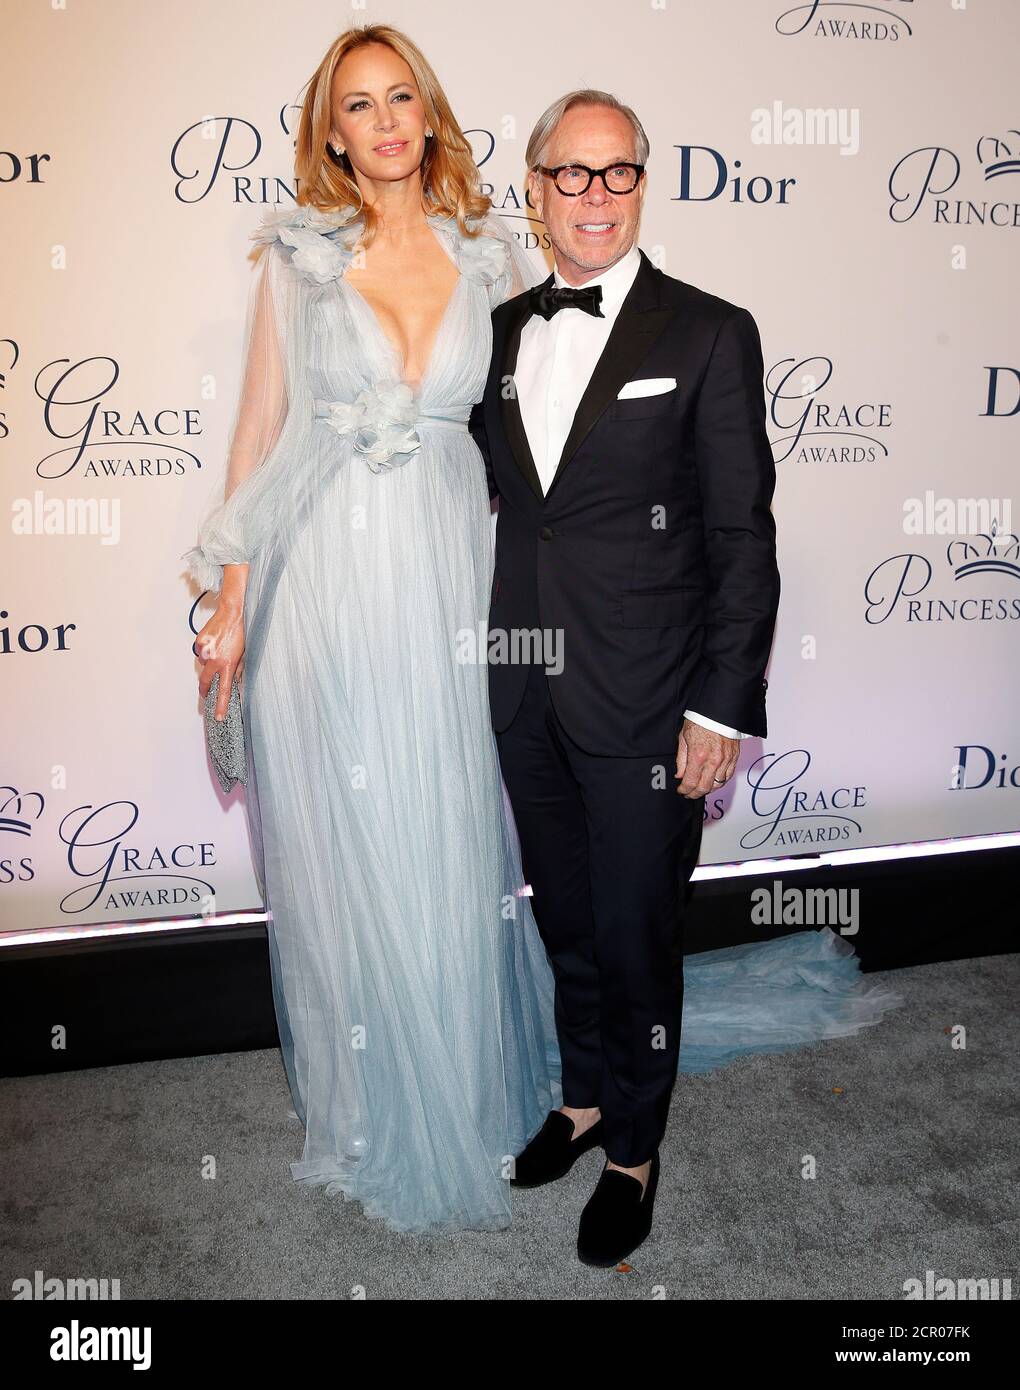 prose Handful storm Designer Tommy Hilfiger and wife Dee Ocleppo arrive for the 2016 Princess  Grace Awards Gala in the Manhattan borough of New York, New York, U.S.,  October 24, 2016. REUTERS/Carlo Allegri Stock Photo - Alamy